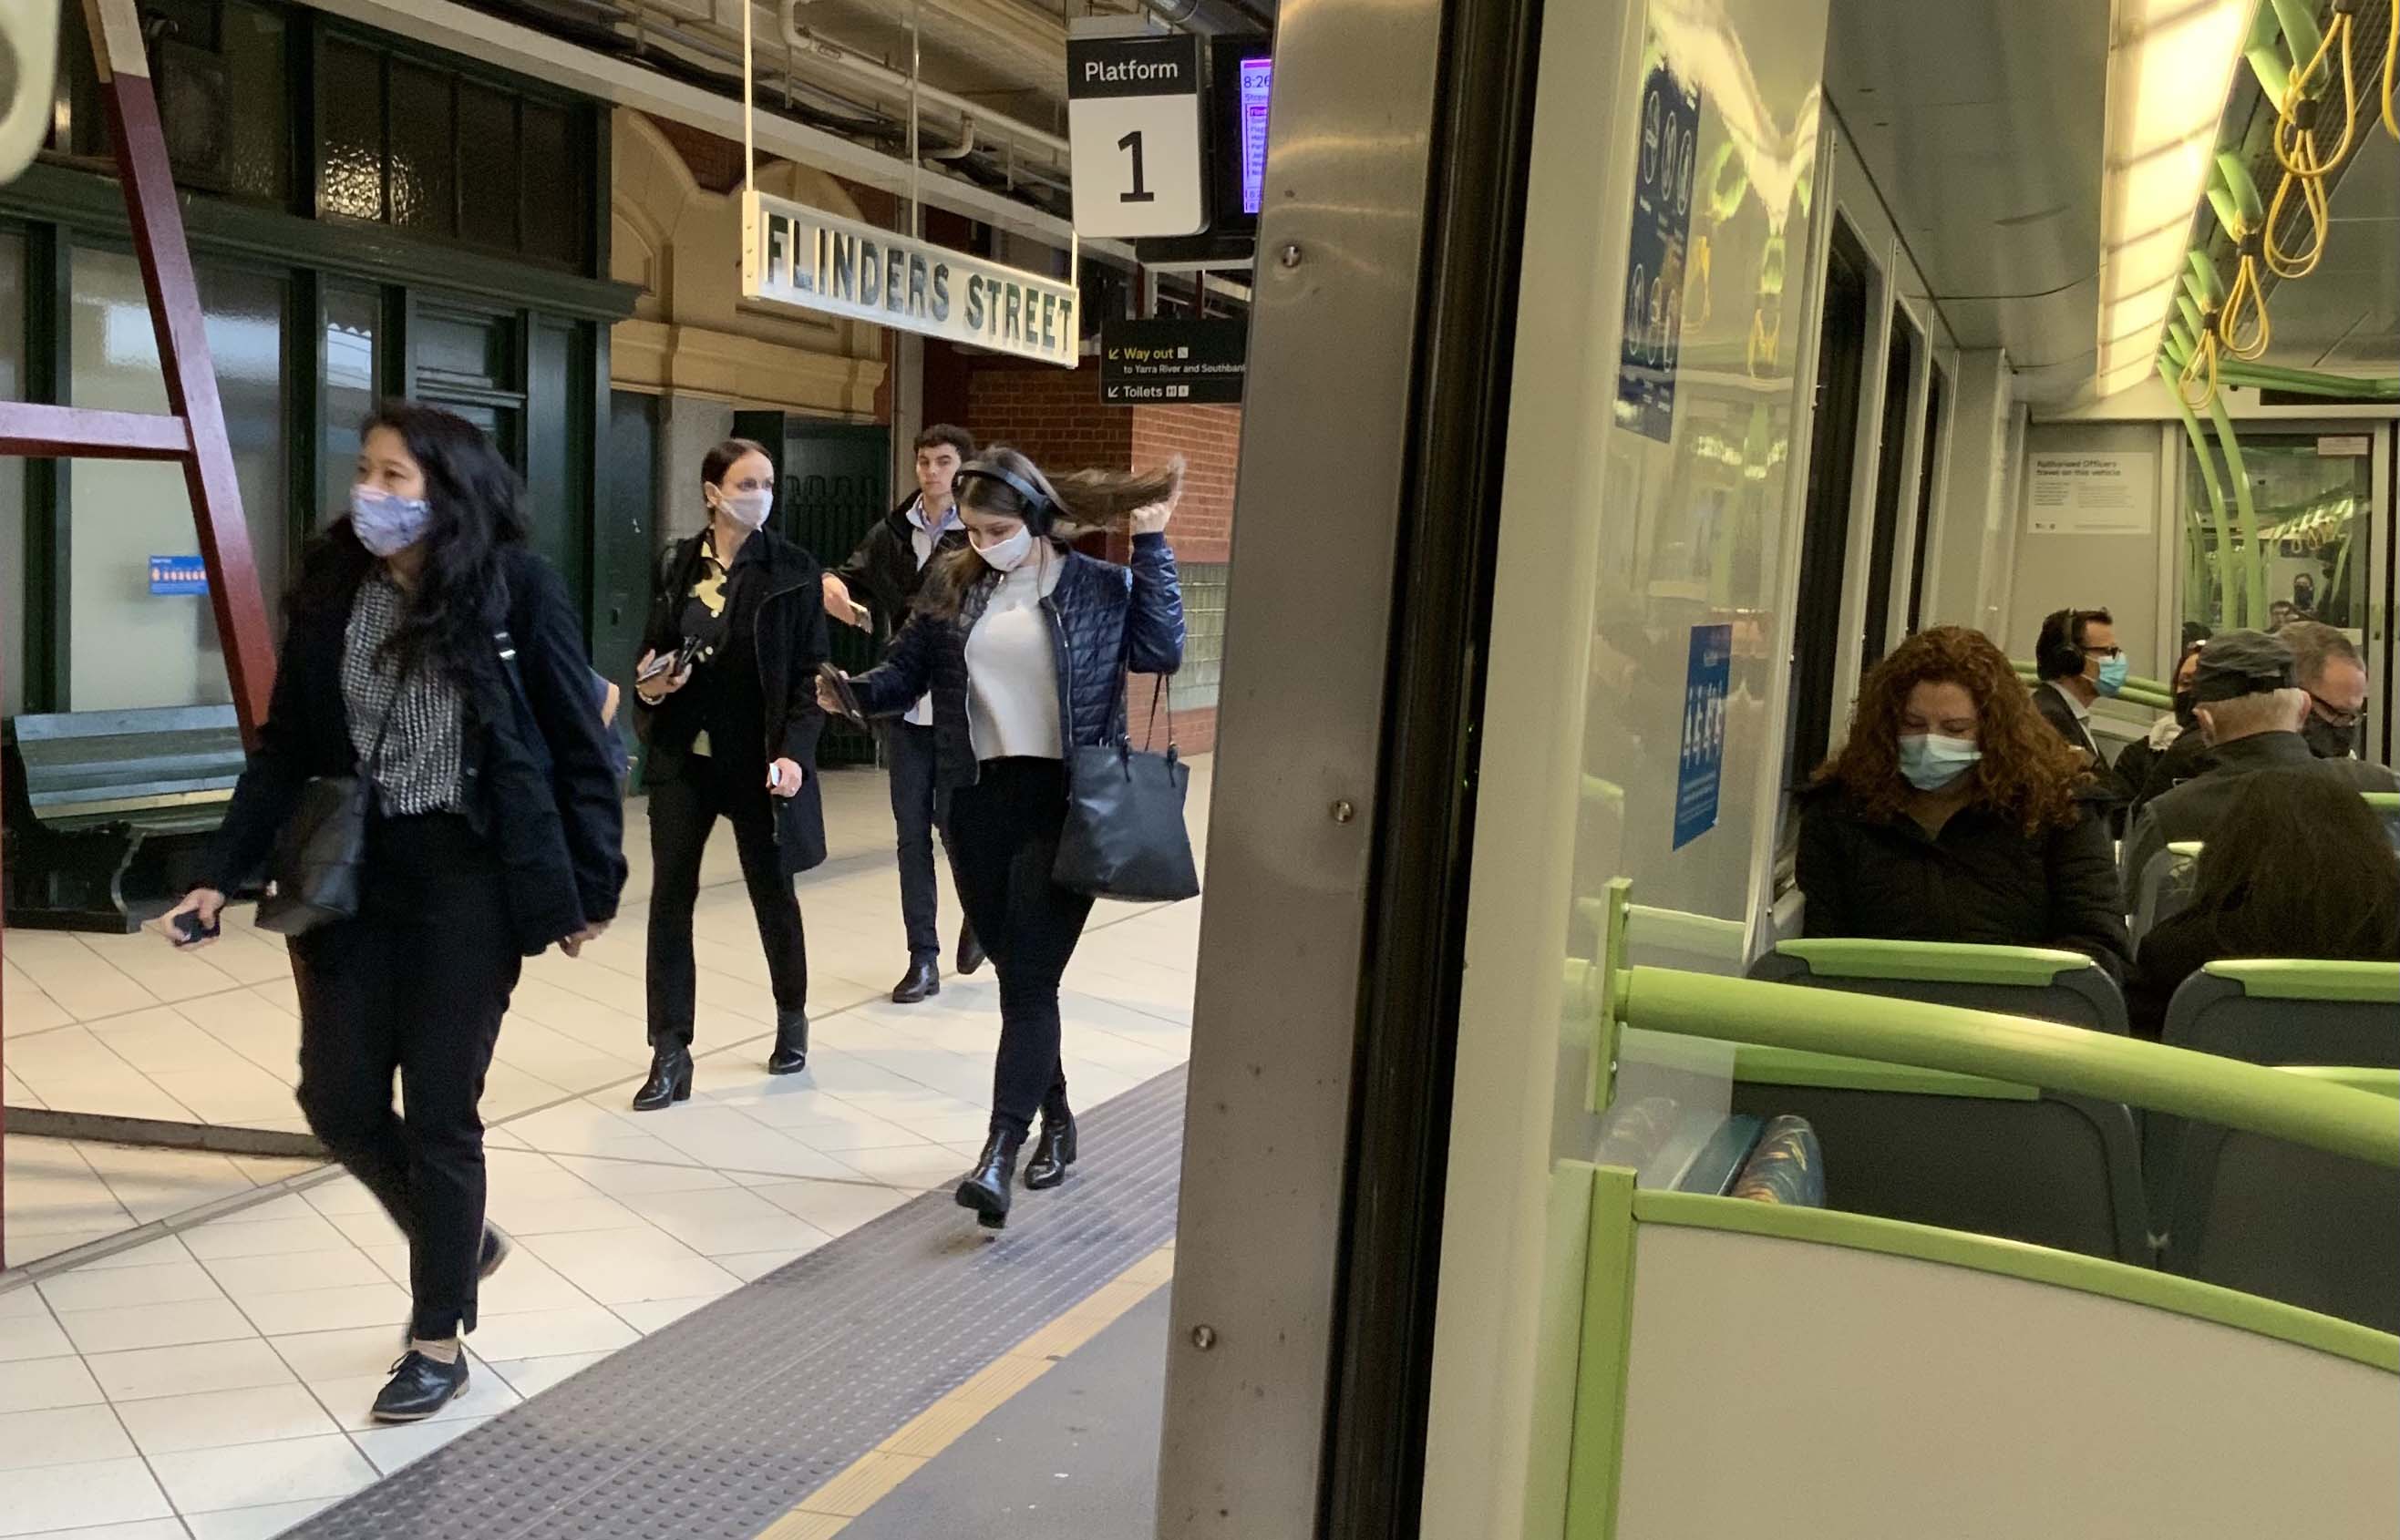 Image shows people wearing face masks whilst using public transport during the COVID-19 pandemic. The photo has been taken from inside a train and shows five people sitting on the train while wearing face masks. Also visible through the open train door are four people walking on the station platform past signs for Flinders Street Station and Platform 1.